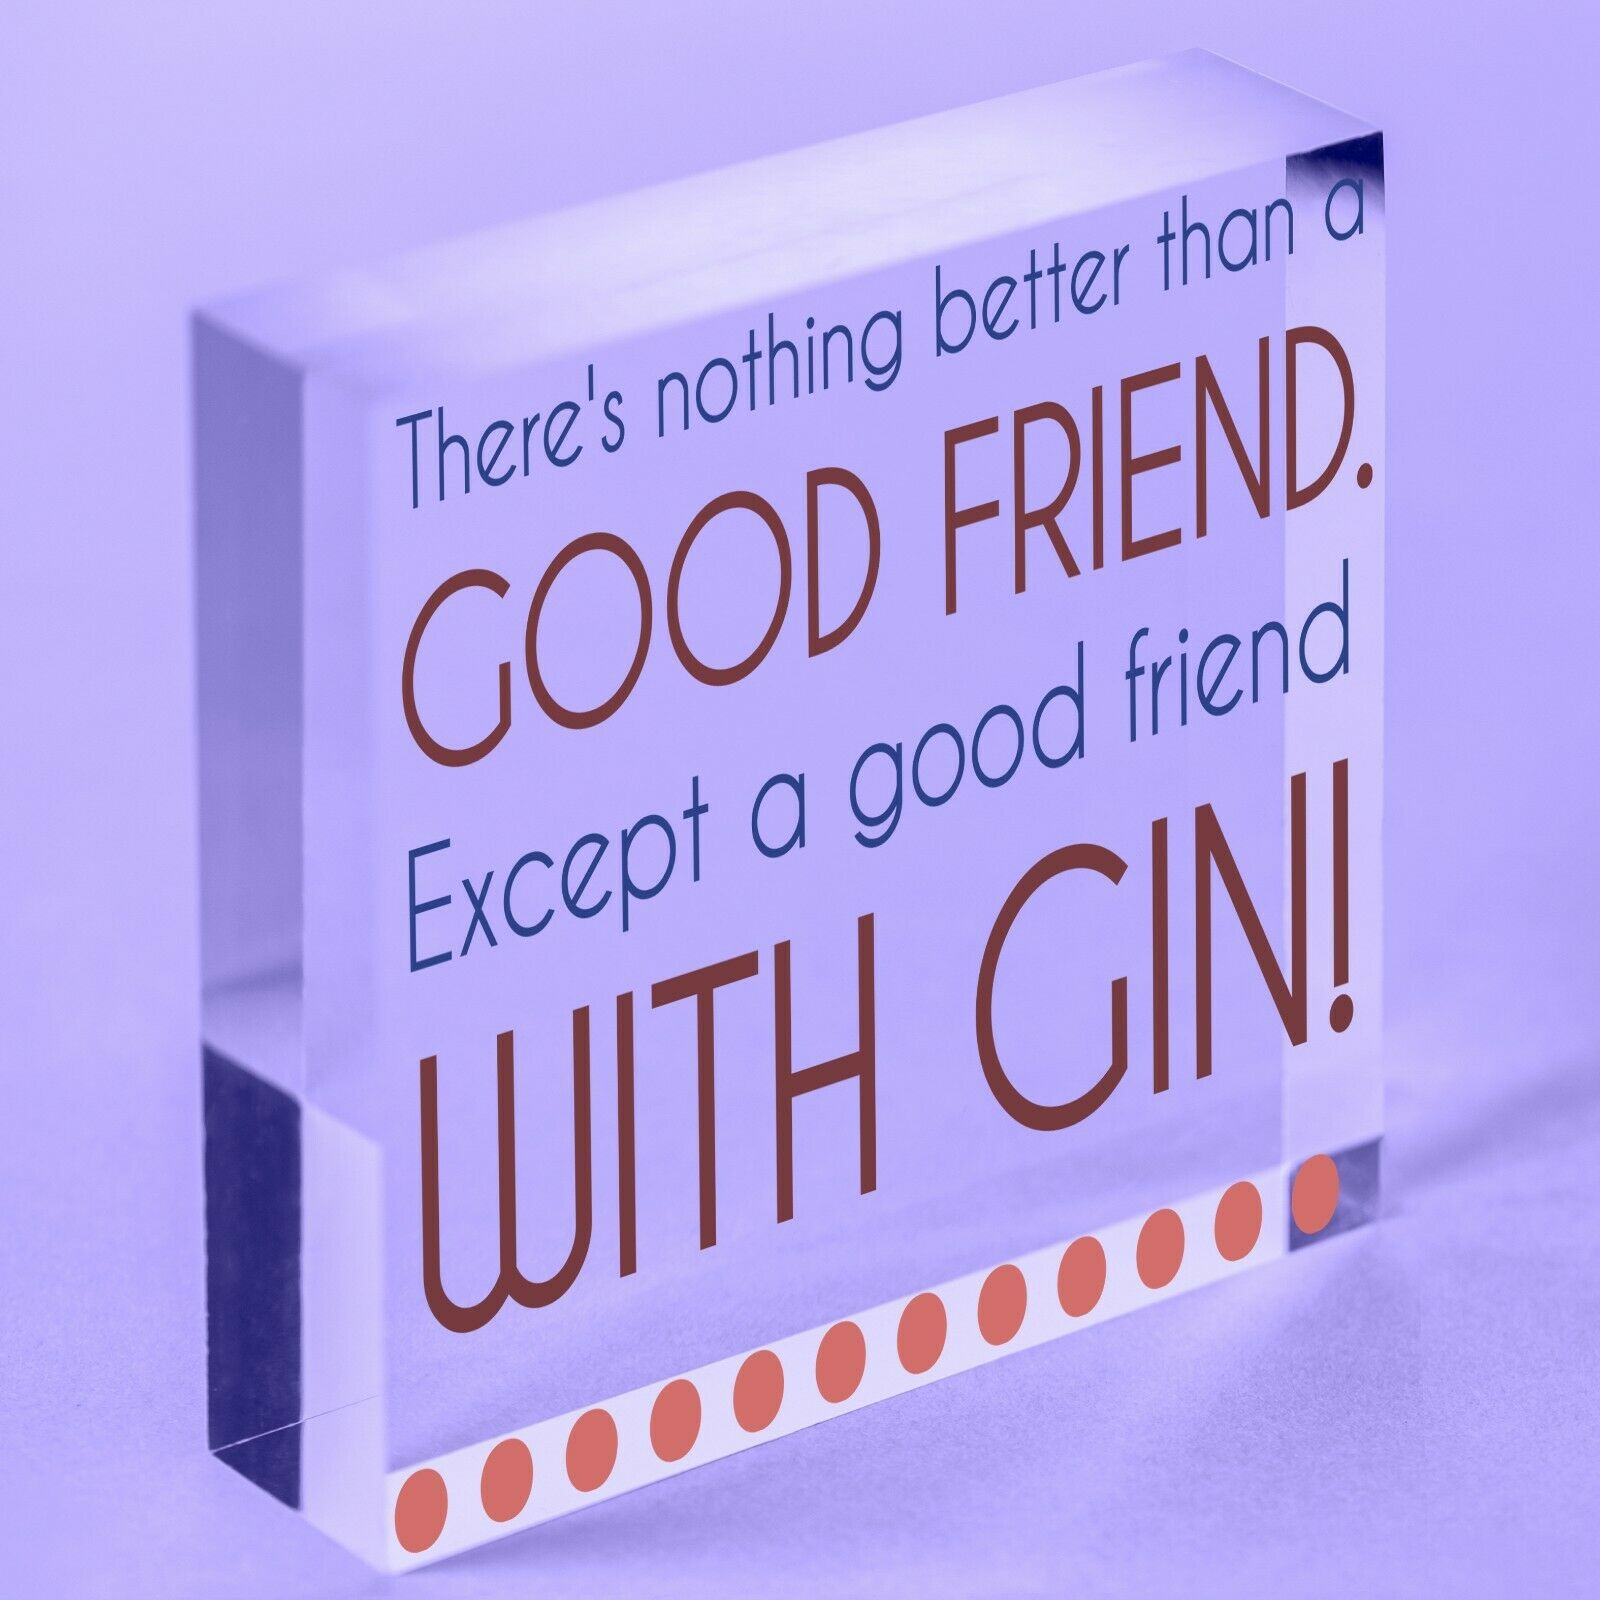 Good Friend With Gin Novelty Acrylic Plaque Alcohol Joke Sign